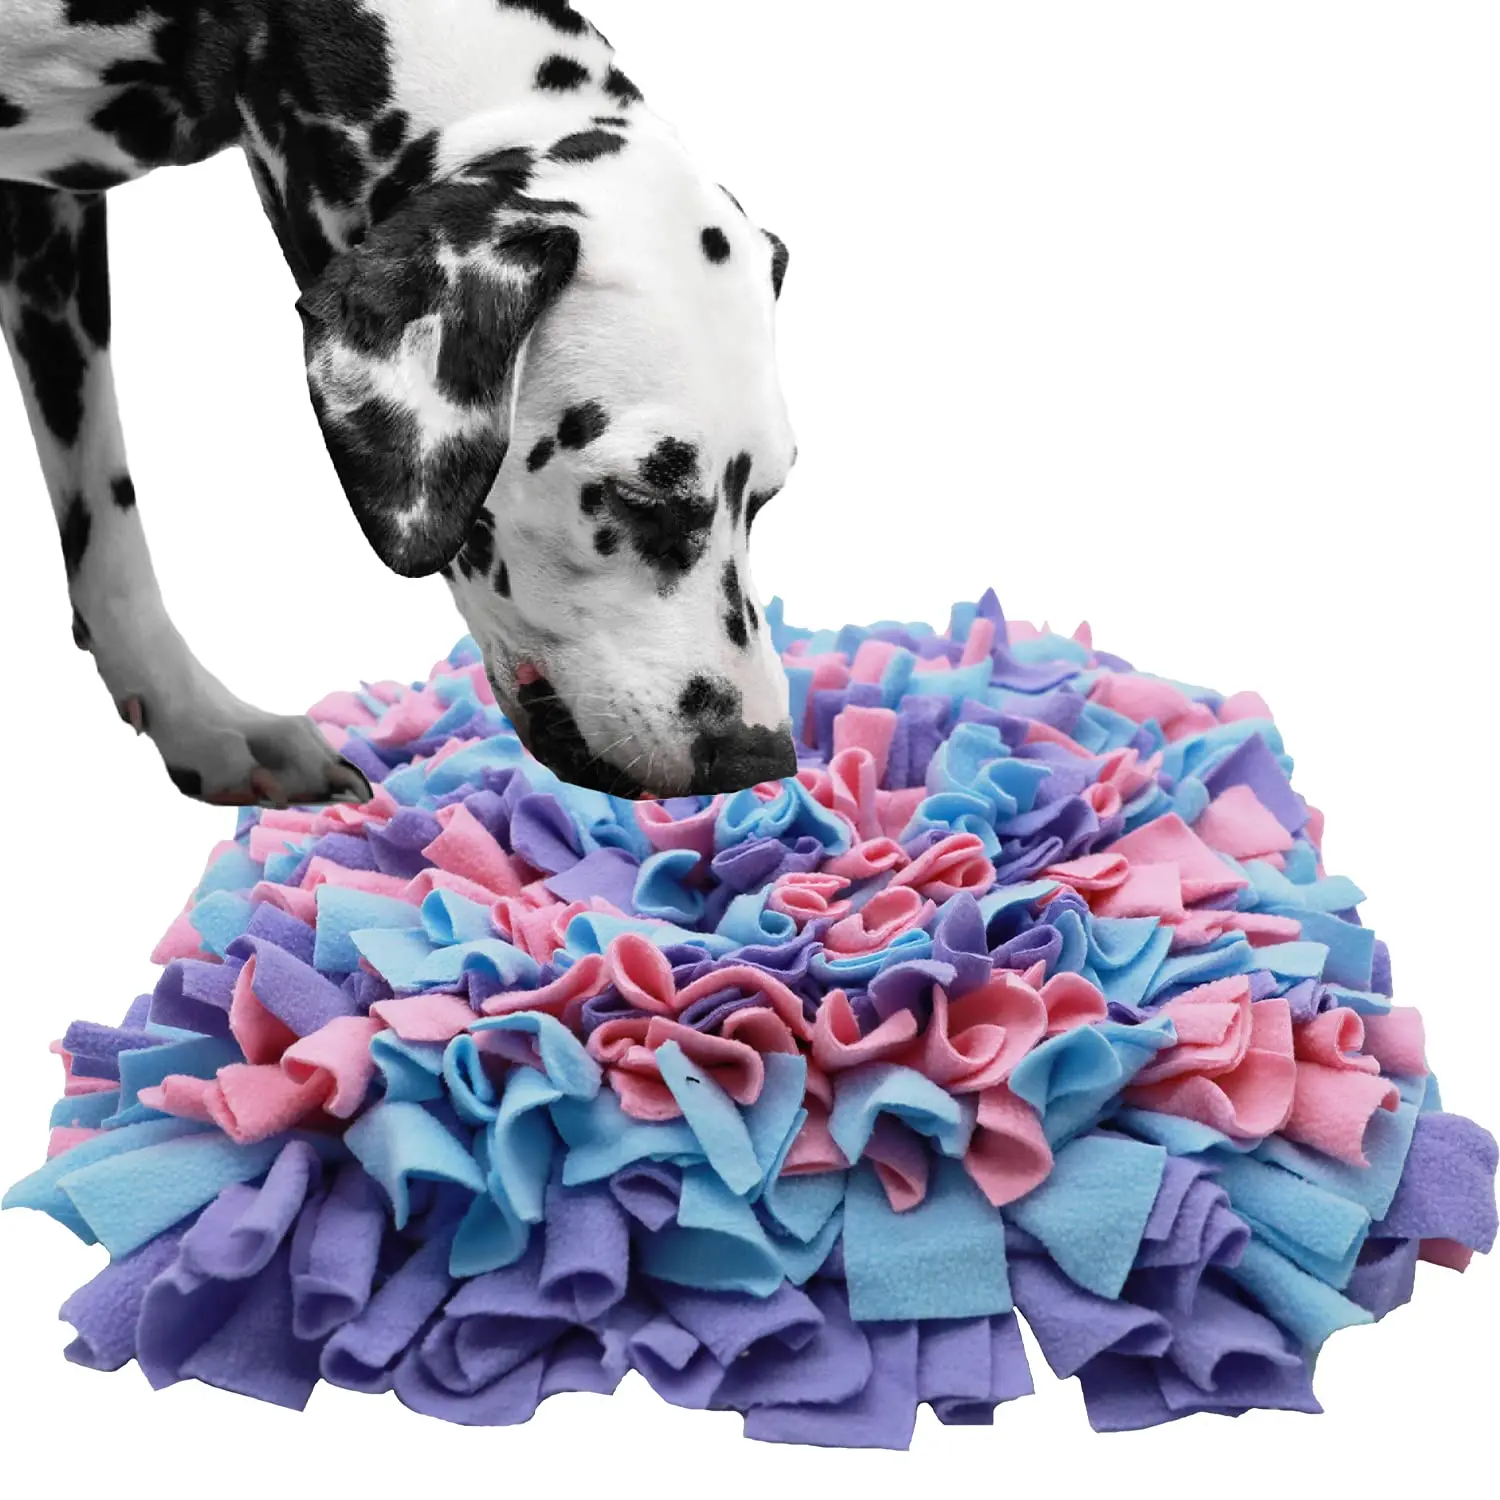 https://ae01.alicdn.com/kf/S6050e372b71f4b098af2929361c56cd6E/Pet-Dog-Snuffle-Mat-Nose-Smell-Training-Sniffing-Pad-Dog-Puzzle-Toy-Slow-Feeding-Bowl-Food.jpg